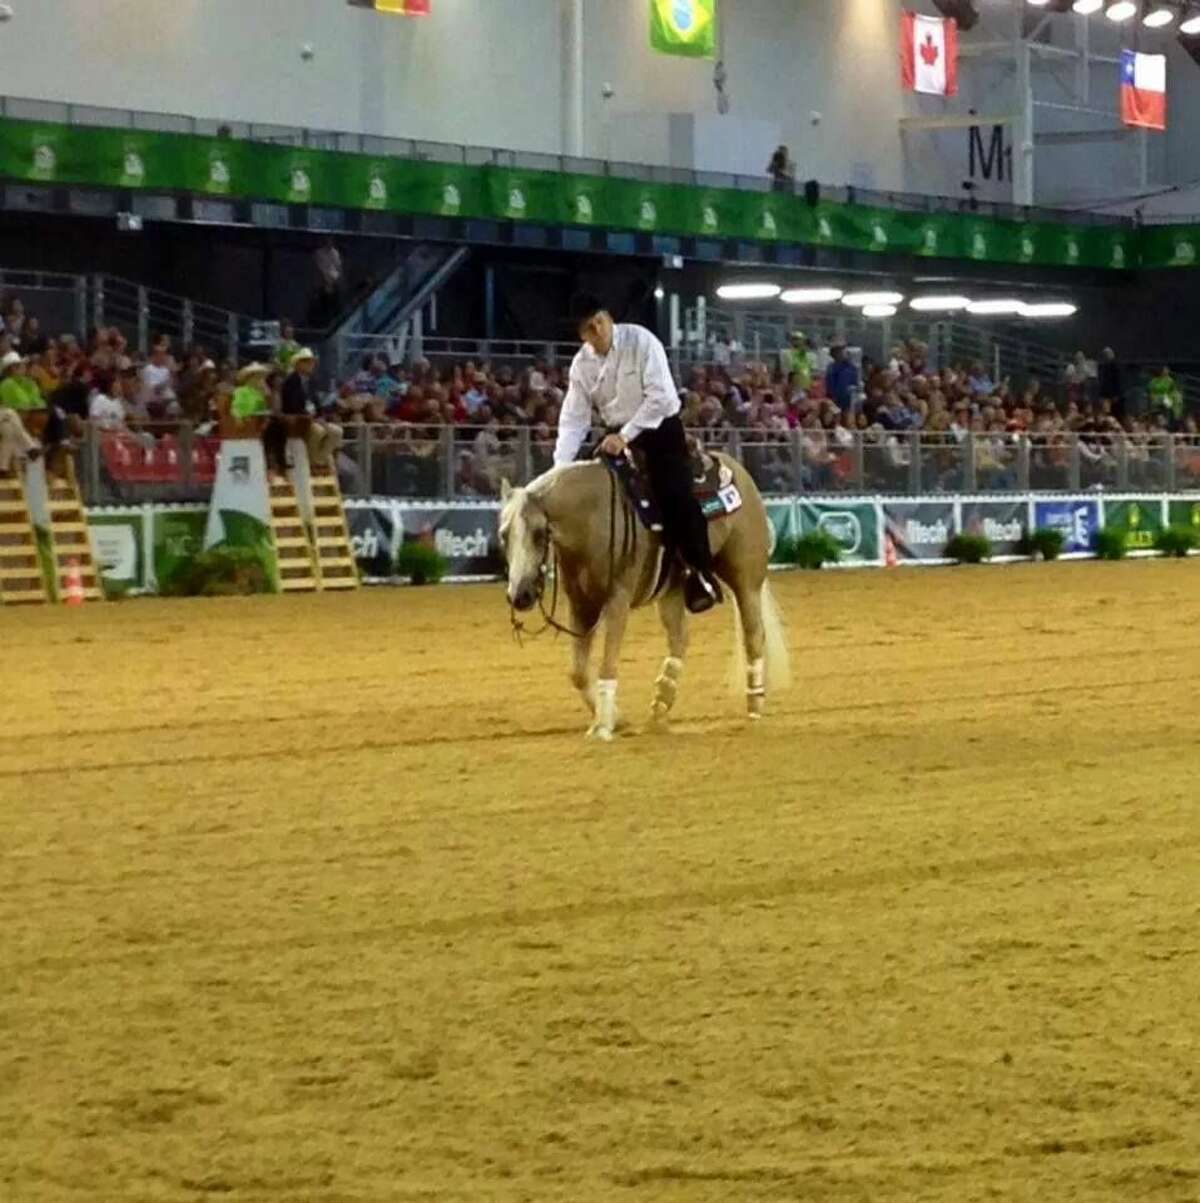 Two-time gold medalist Tom McCutcheon rides Dun Git A Nicadual in the World Equestrian Games in Normandy, France. The horse is owned by Jennifer and Jaci Marley of Plainview.